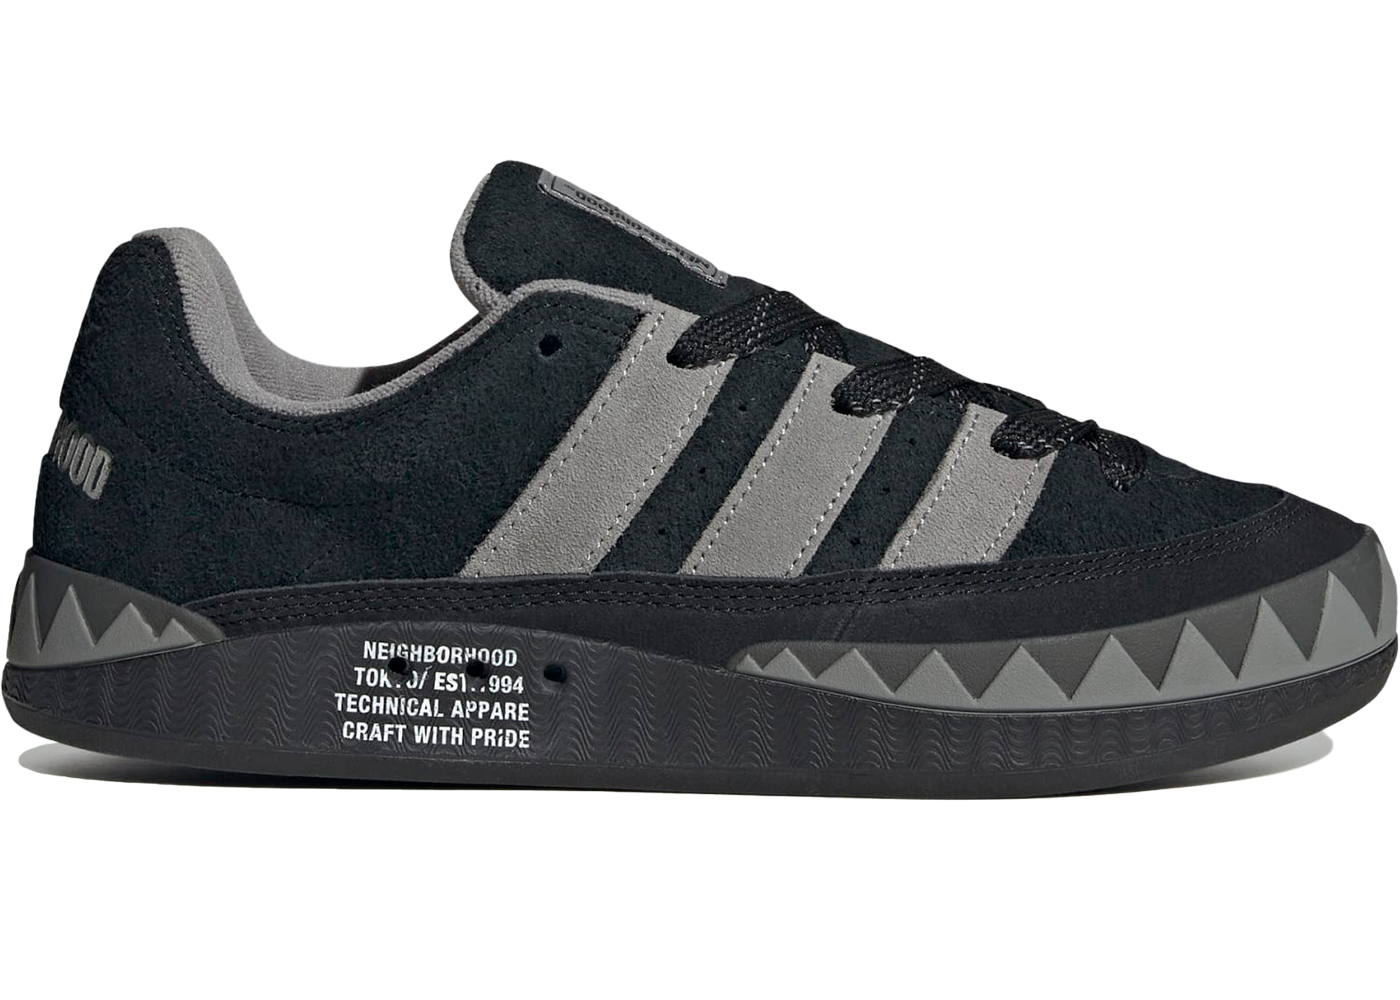 Buy adidas Skateboarding Size 11 Shoes & New Sneakers - StockX